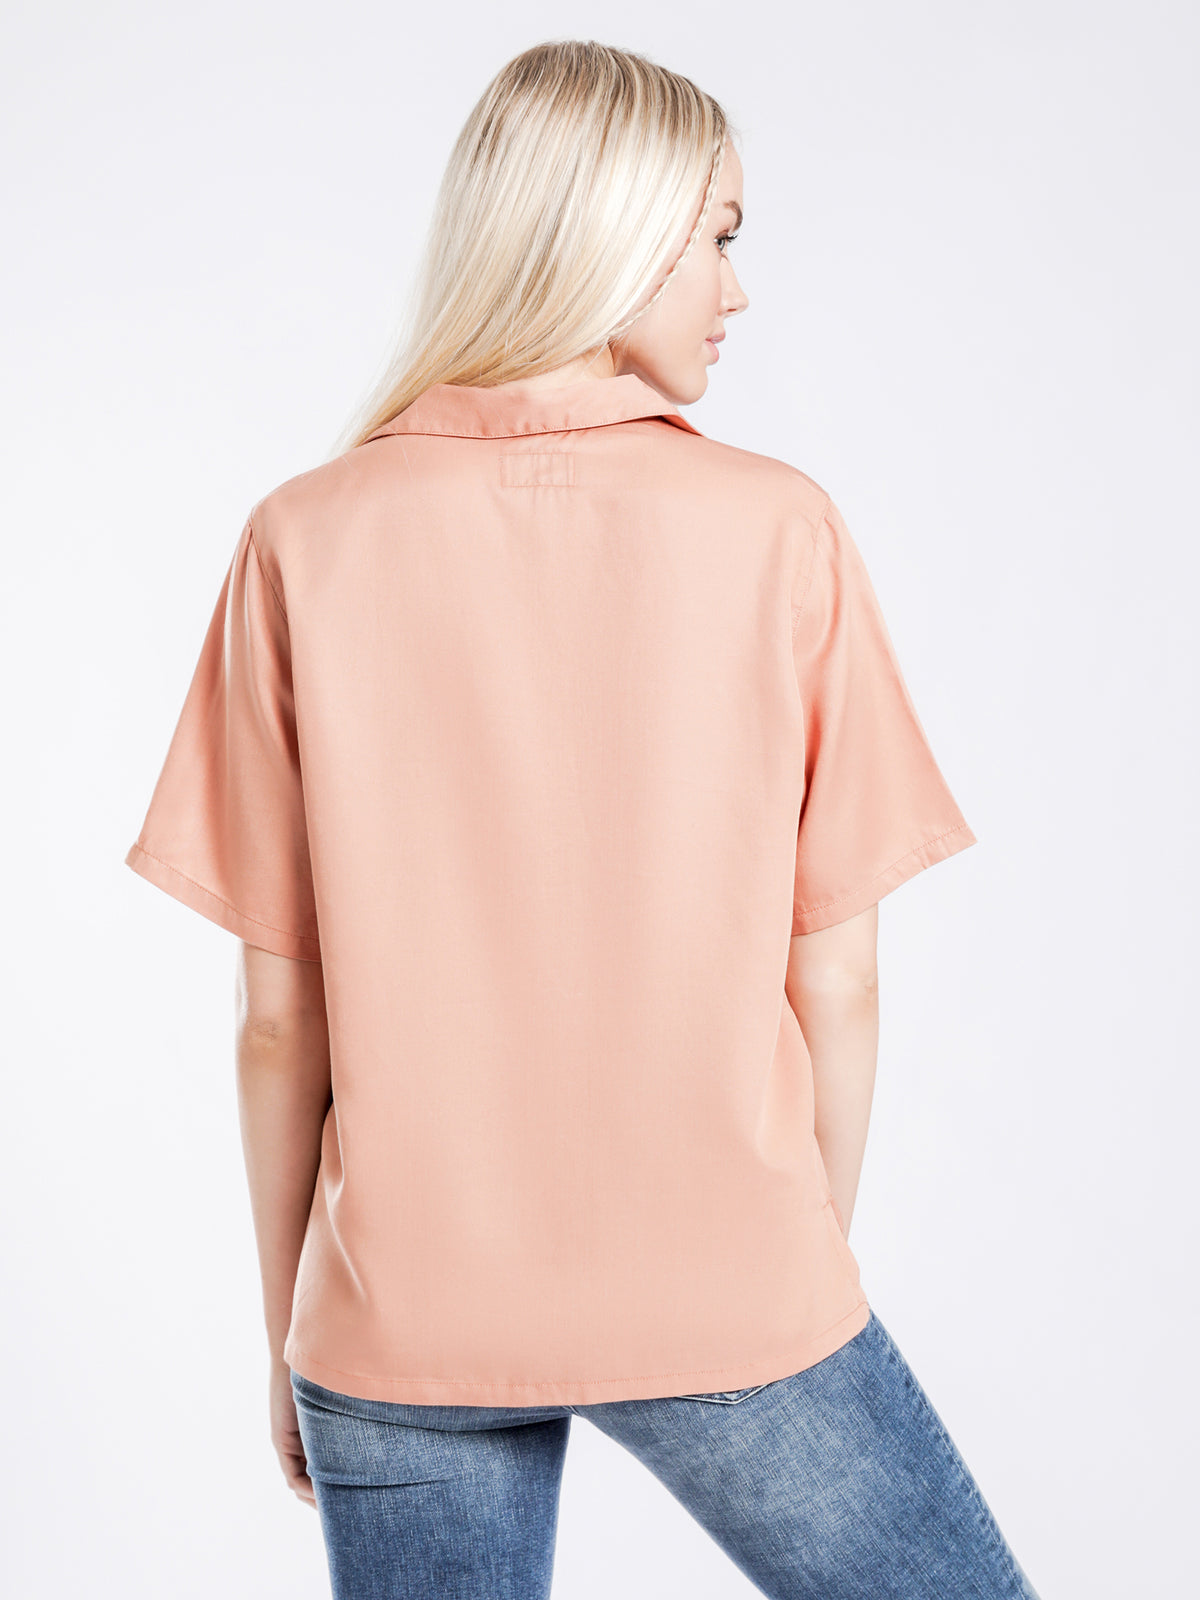 Bea Bowling Shirt in Apricot